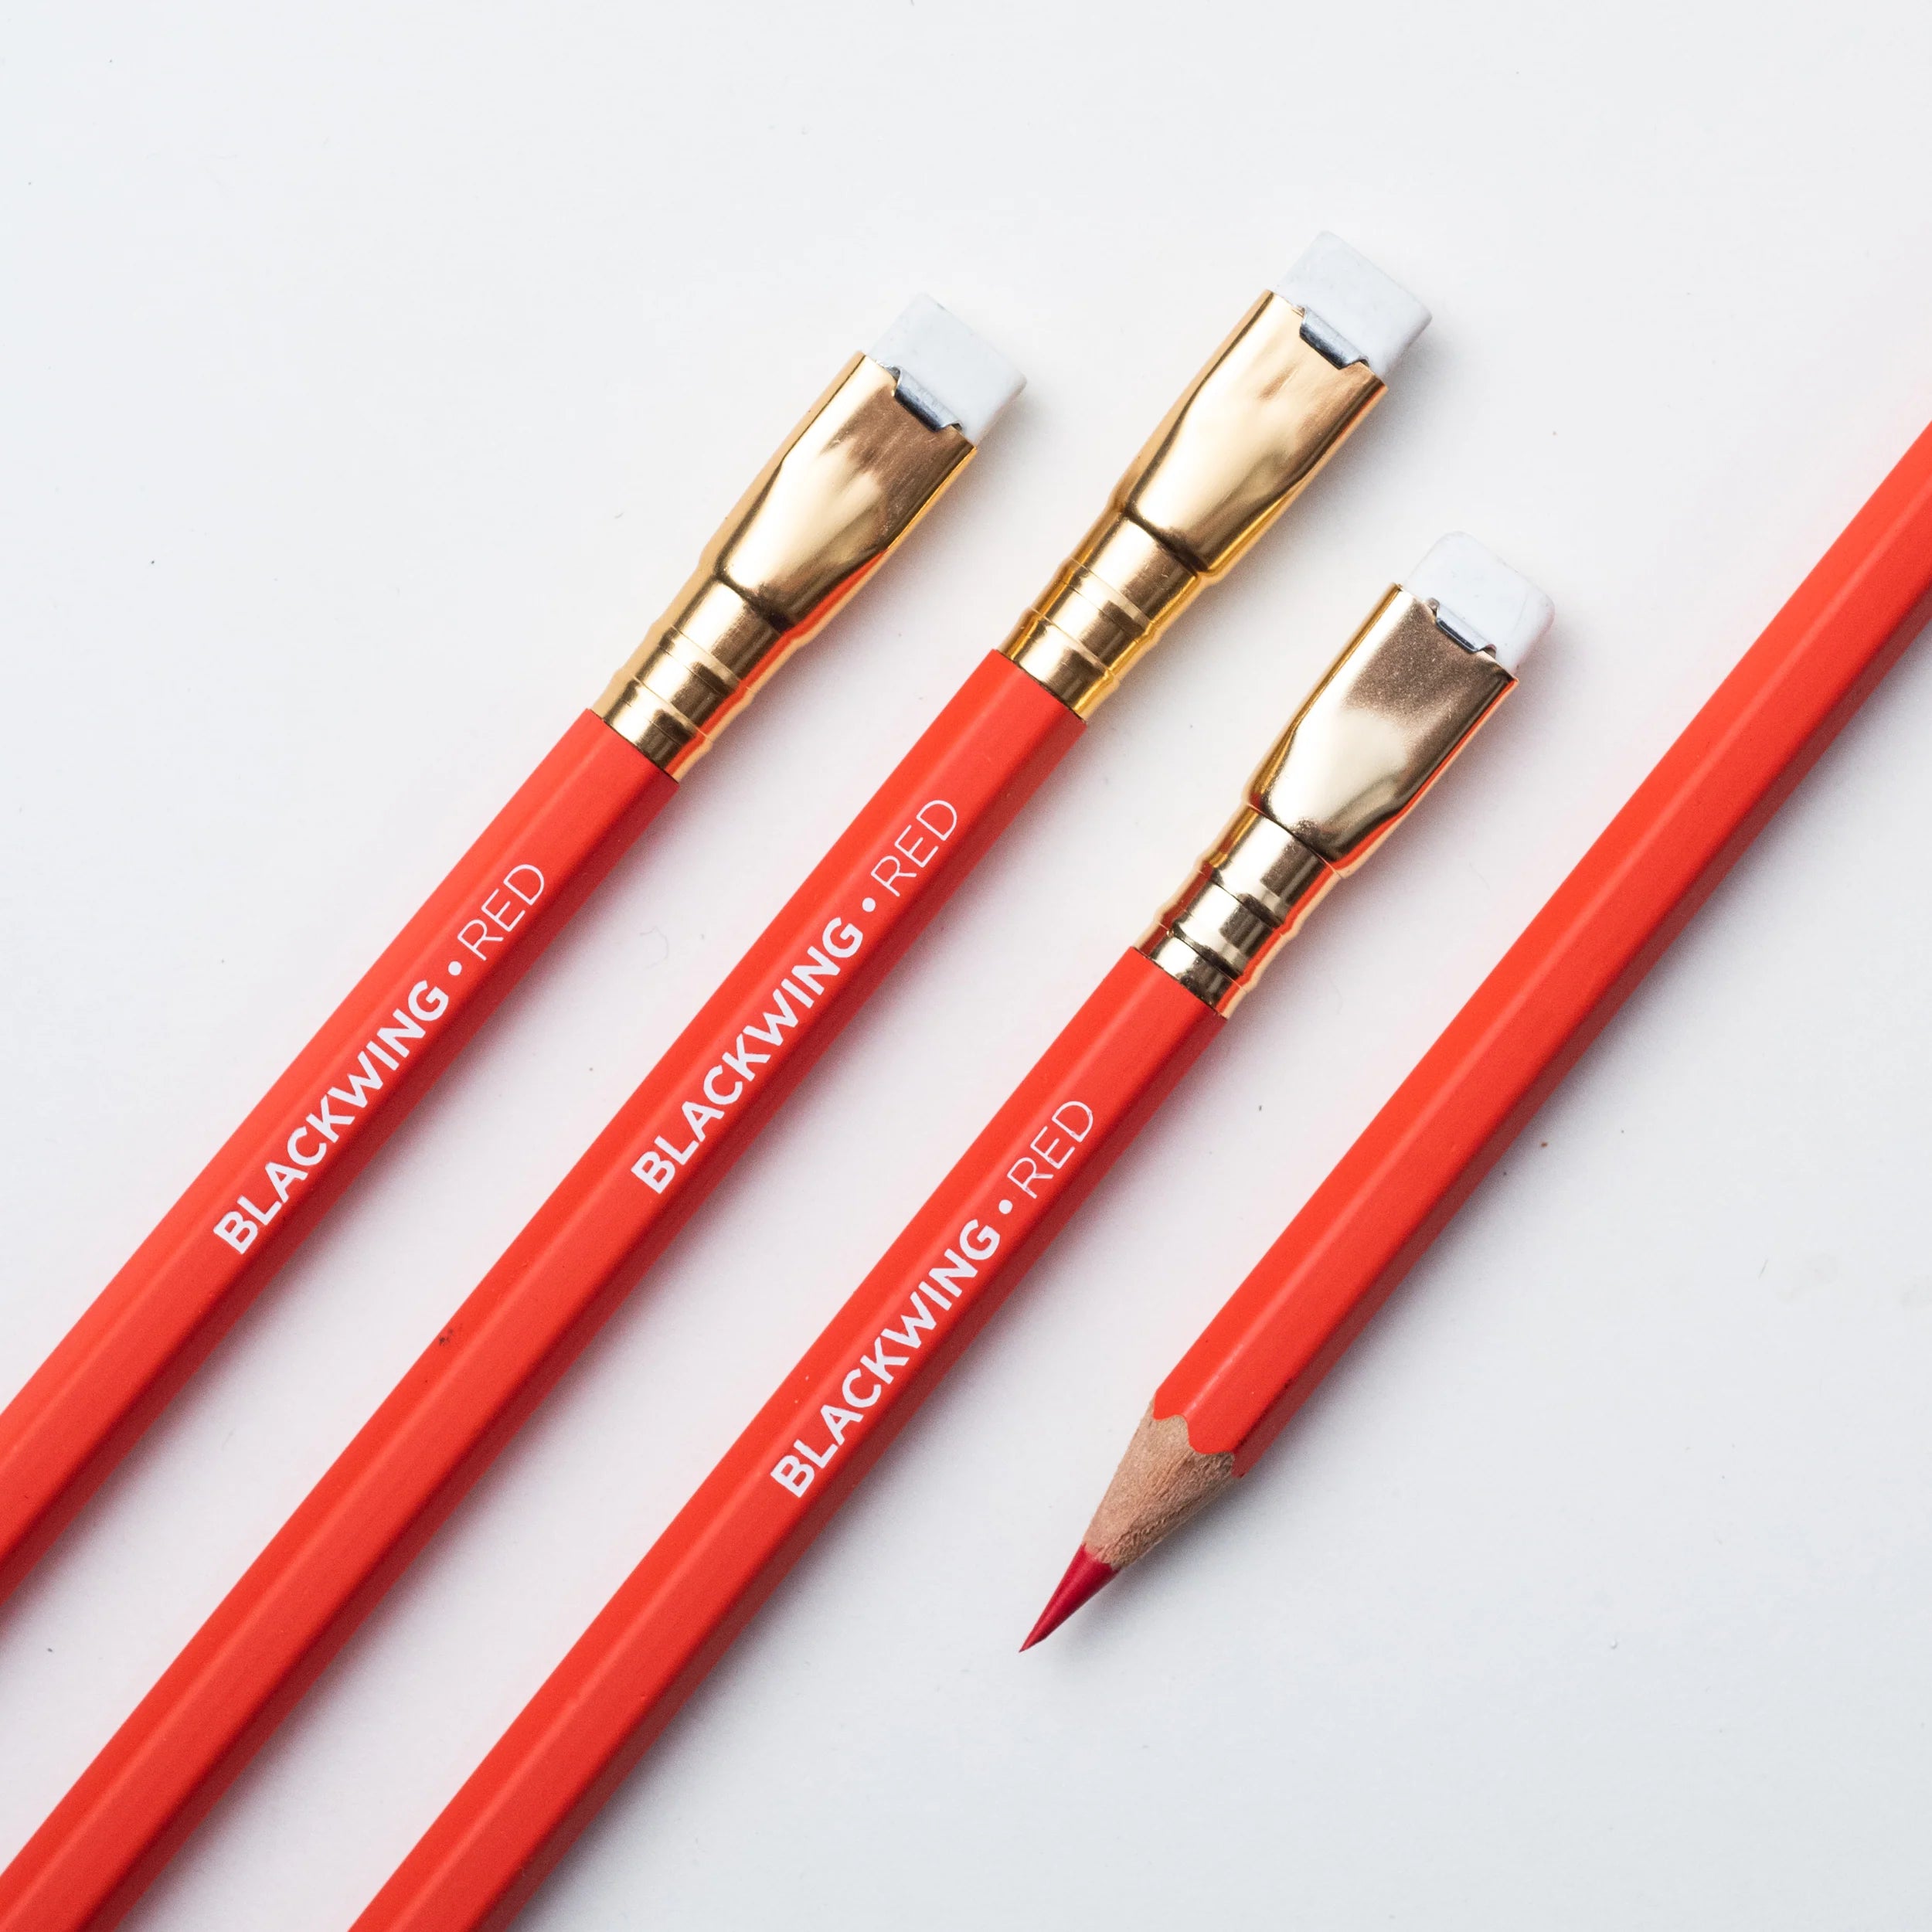 Blackwing Red [4 pencils]